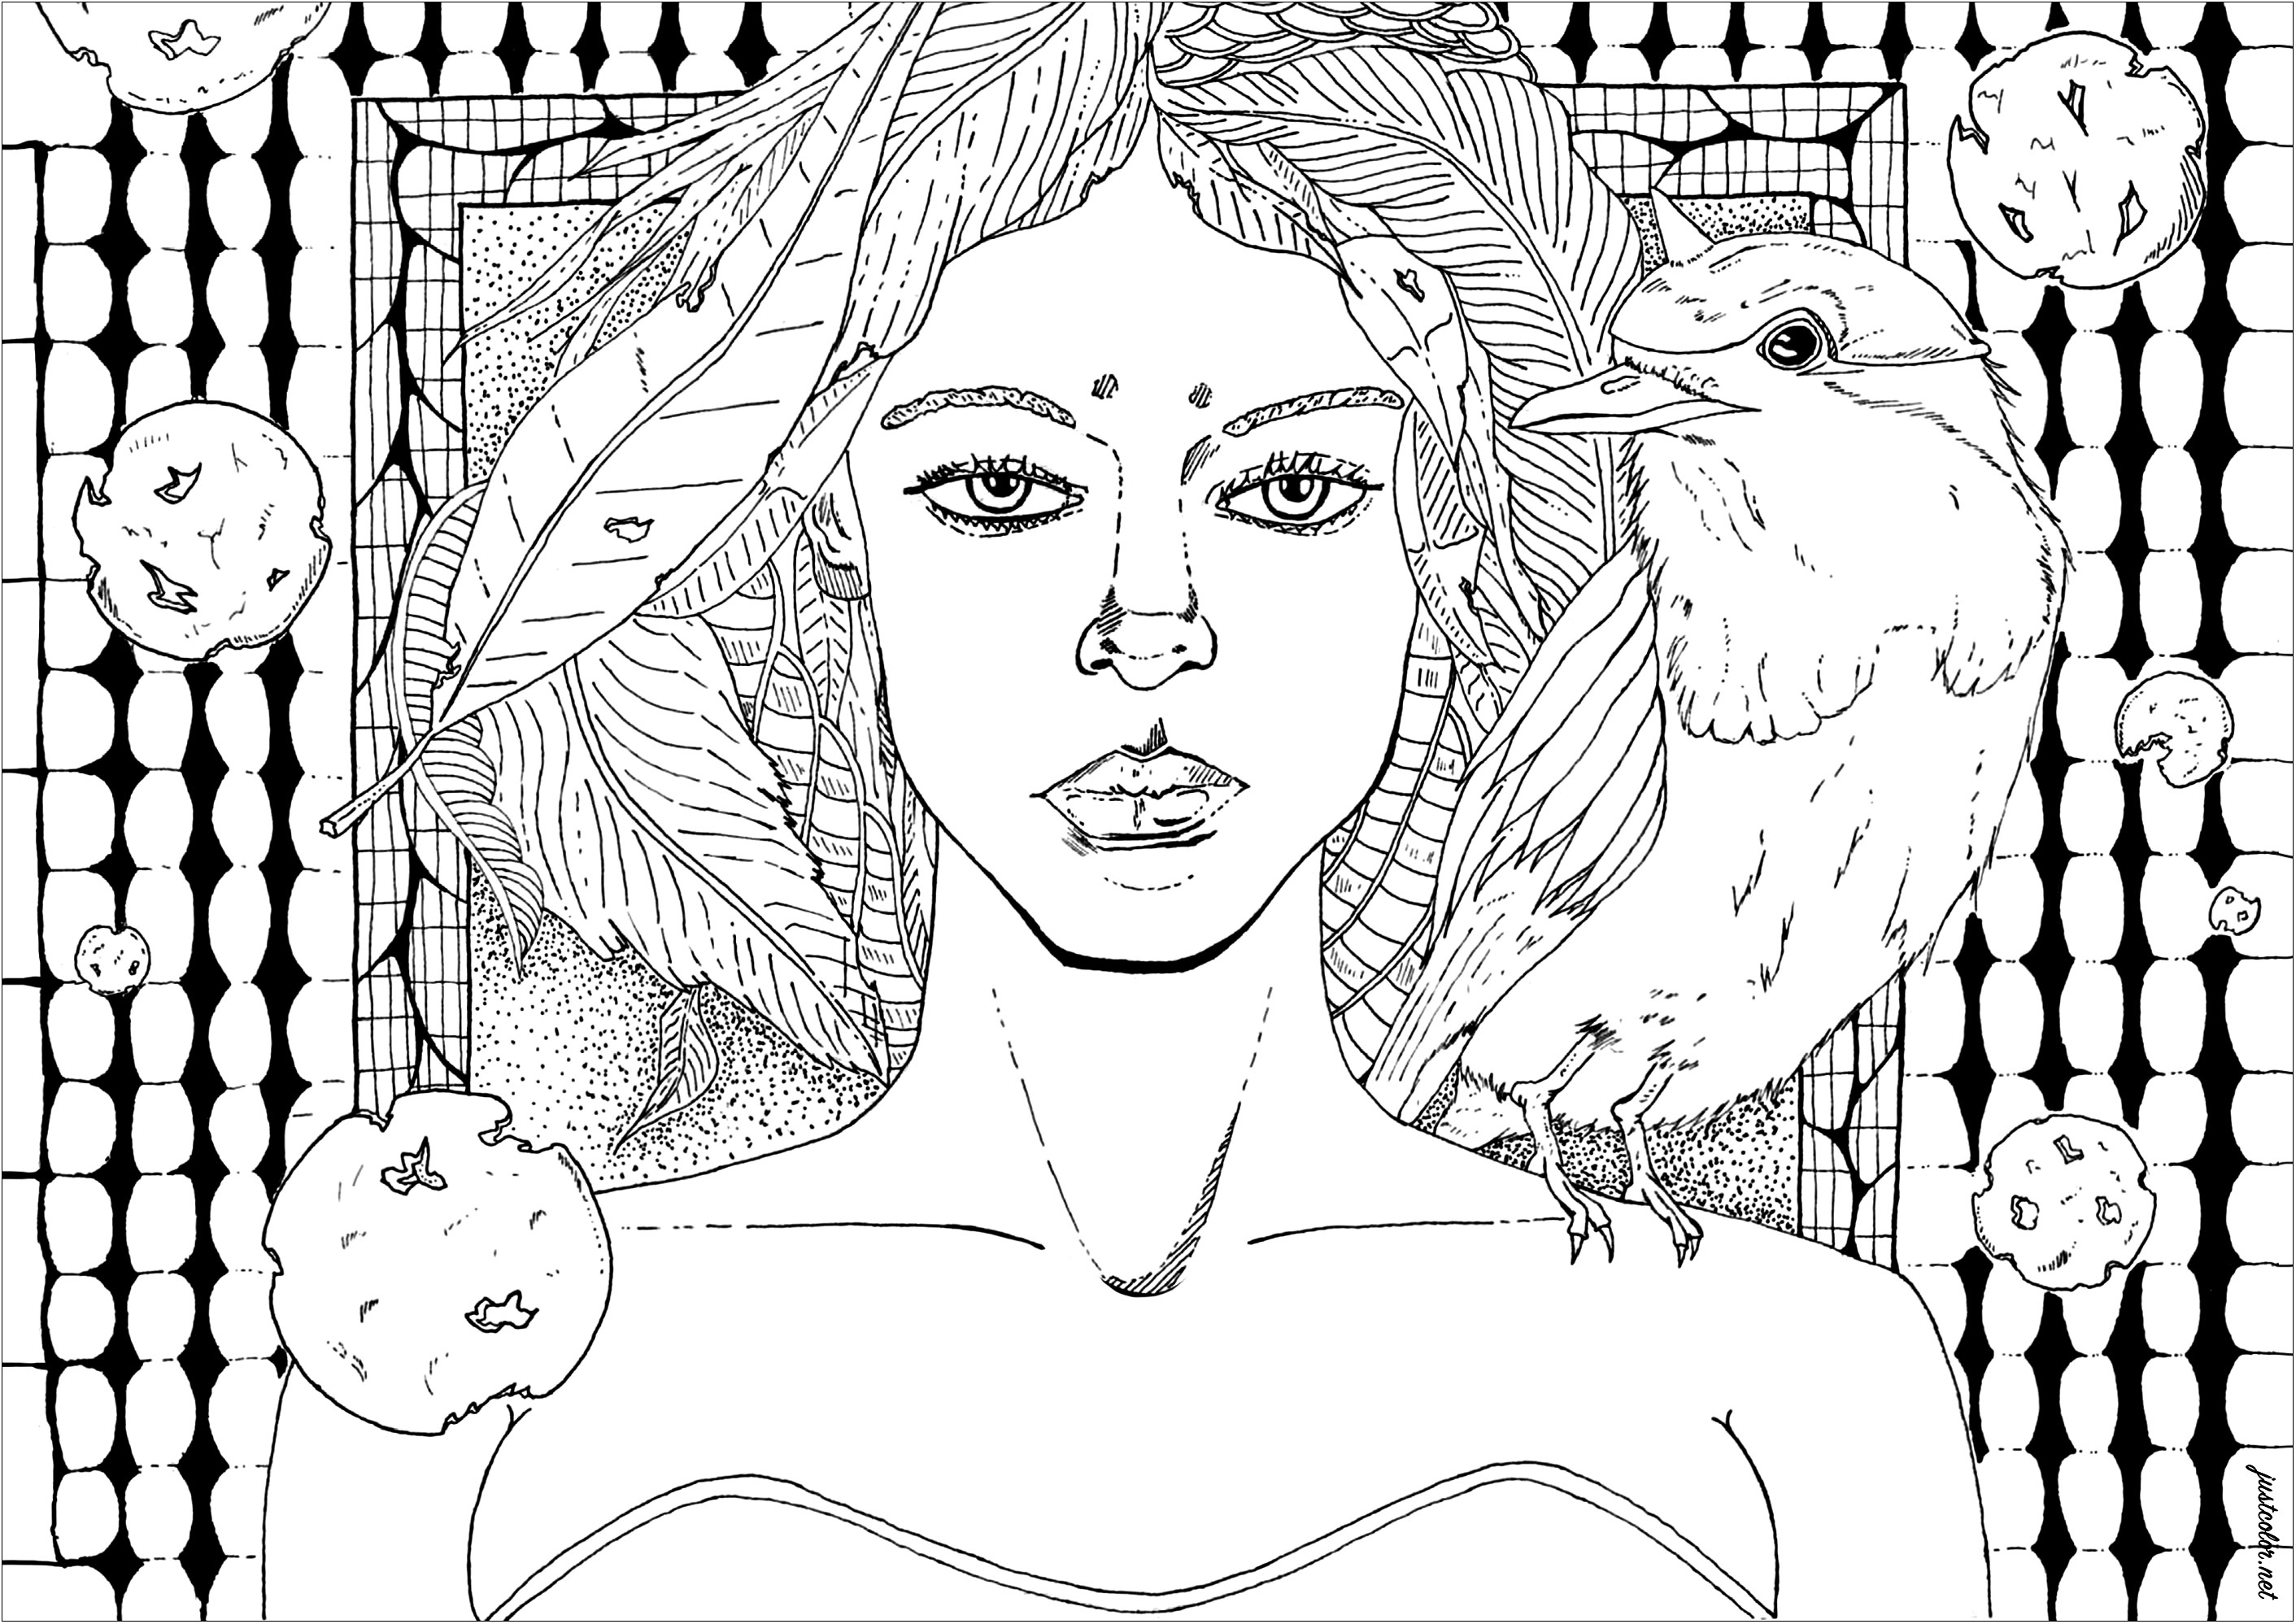 Woman with a deep look, wearing a crown of leaves, and a raven on her shoulder. This elegant woman holds a raven on her shoulder and looks at you with an expression of calm and serenity. The woman and the raven are in harmony, and their presence gives a feeling of peace and tranquility. Many leaves to color in the hair of the character, and in the background.